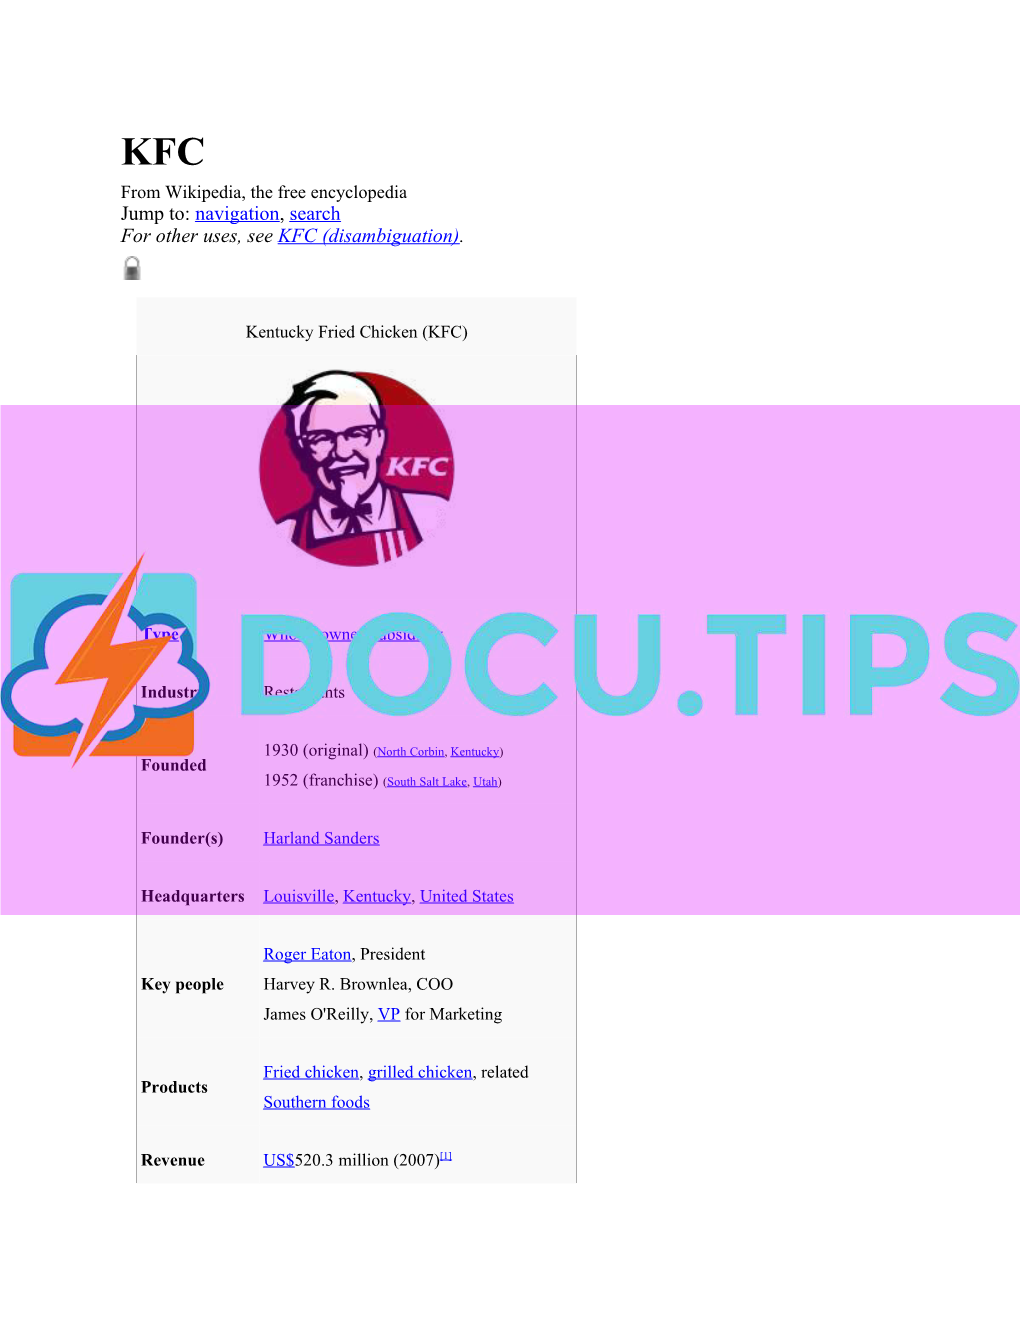 KFC from Wikipedia, the Free Encyclopedia Jump To: Navigation, Search for Other Uses, See KFC (Disambiguation)